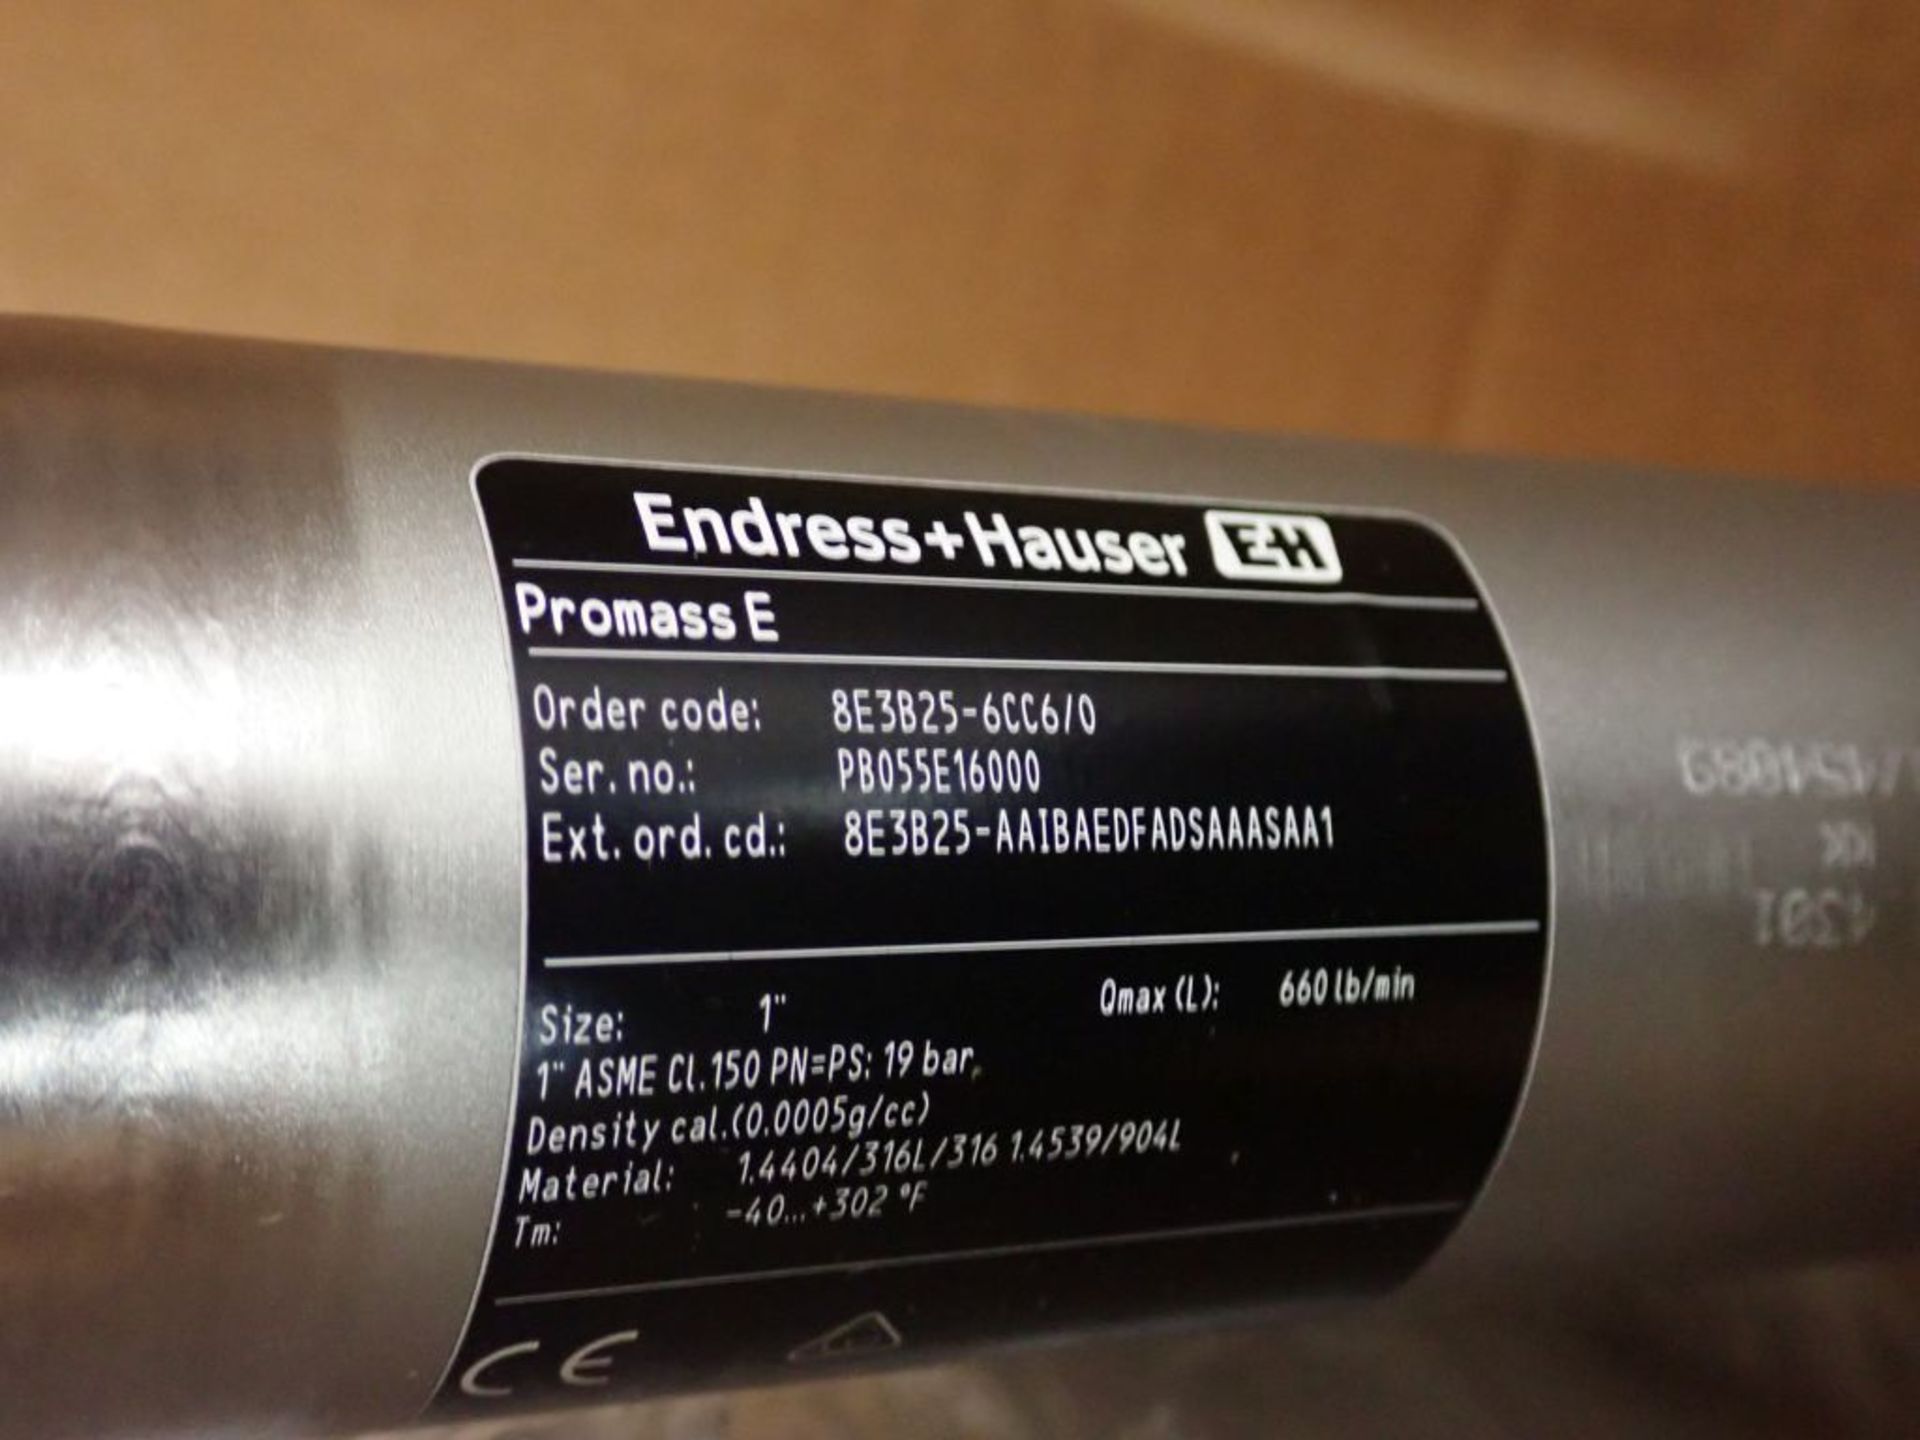 Endress Hauser Power Supply - Part No. 8E3B25-6CC6/0; New Surplus; Tag: 222468 - Image 8 of 11